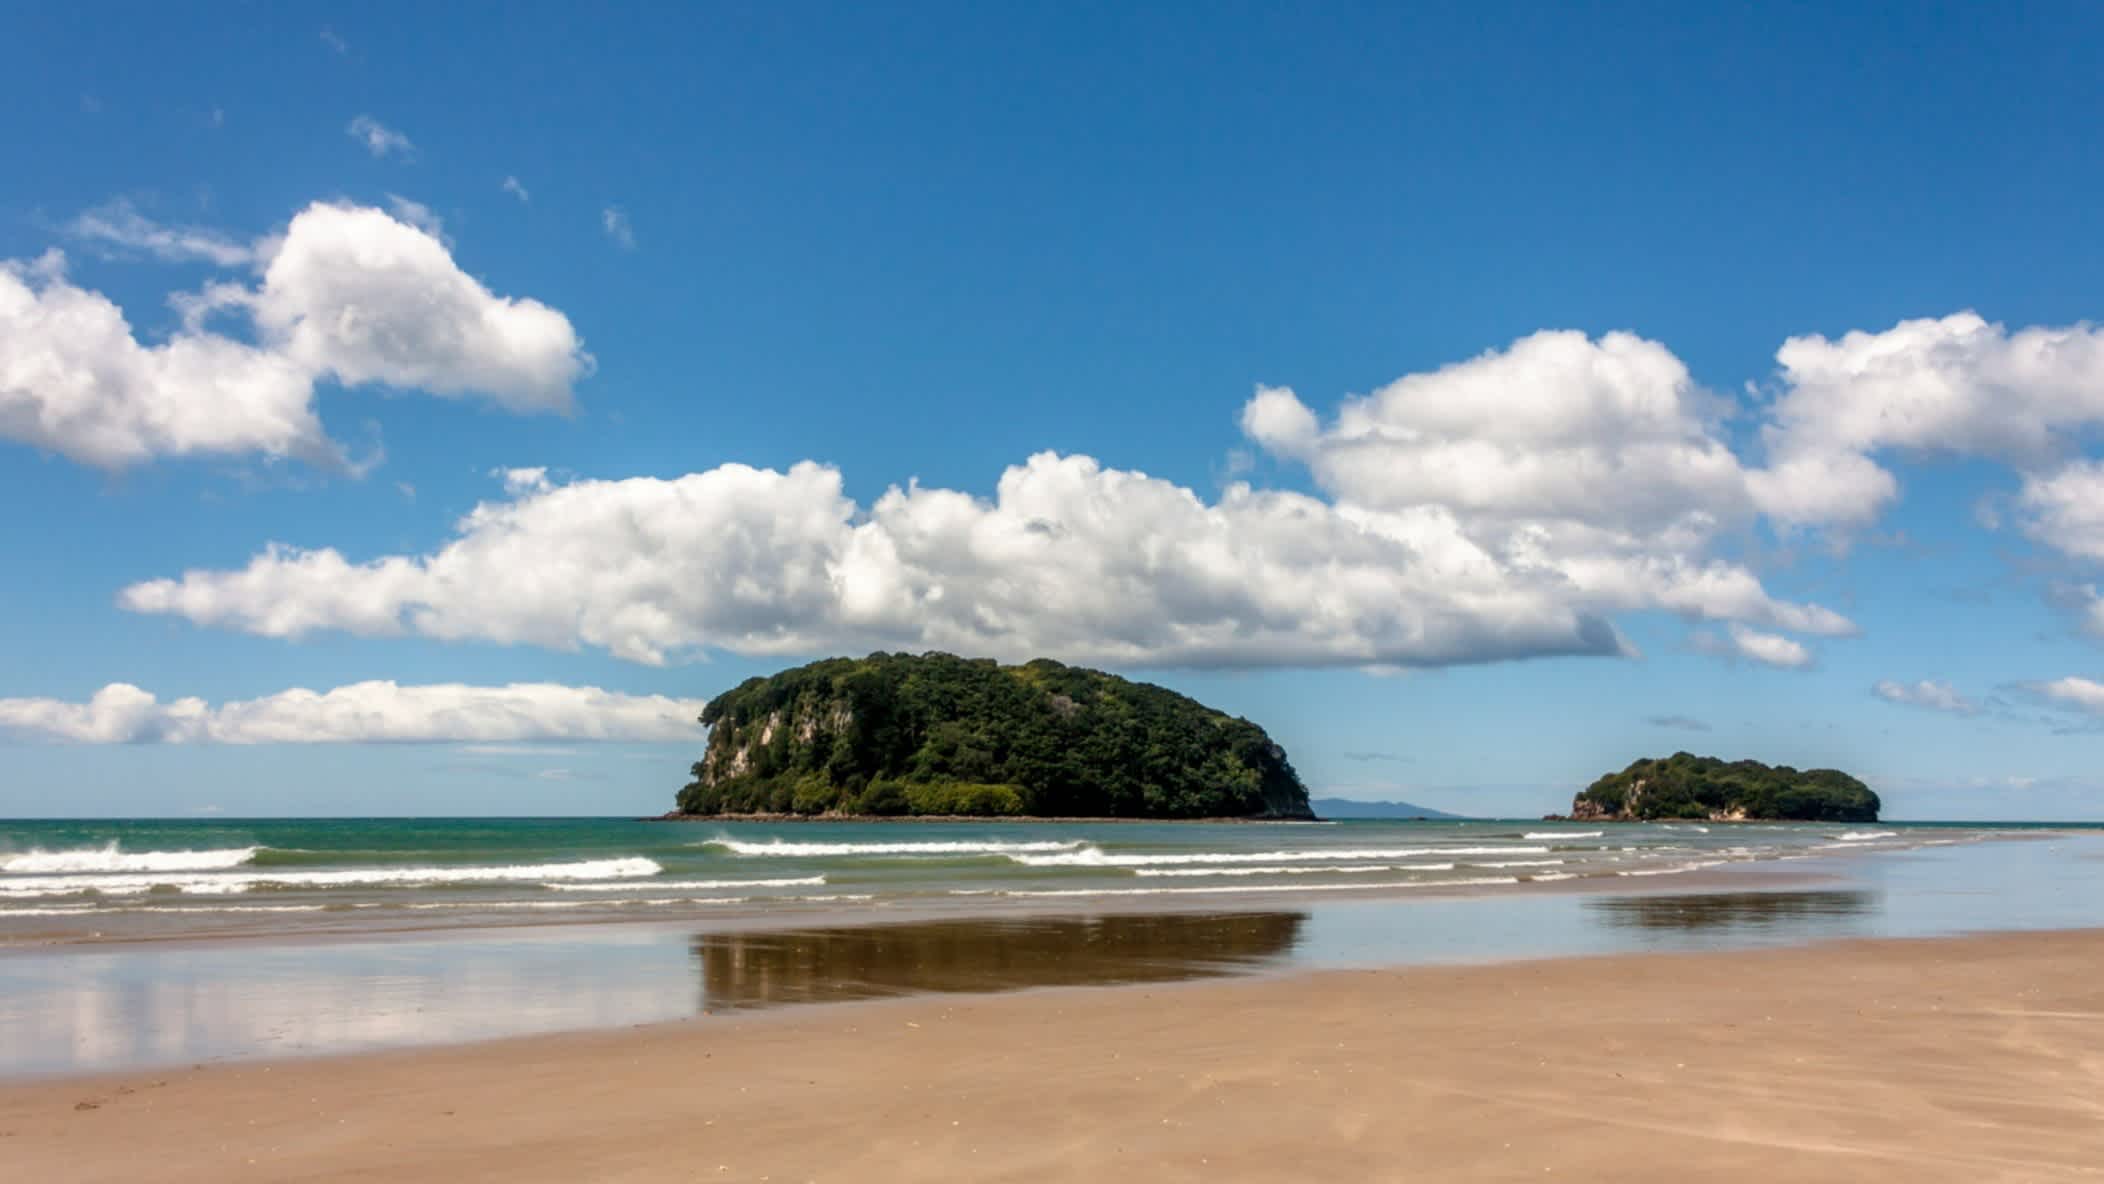 View of the sand and waves of Whangamata Beach, North Island, New Zealand with green rocks in the background

